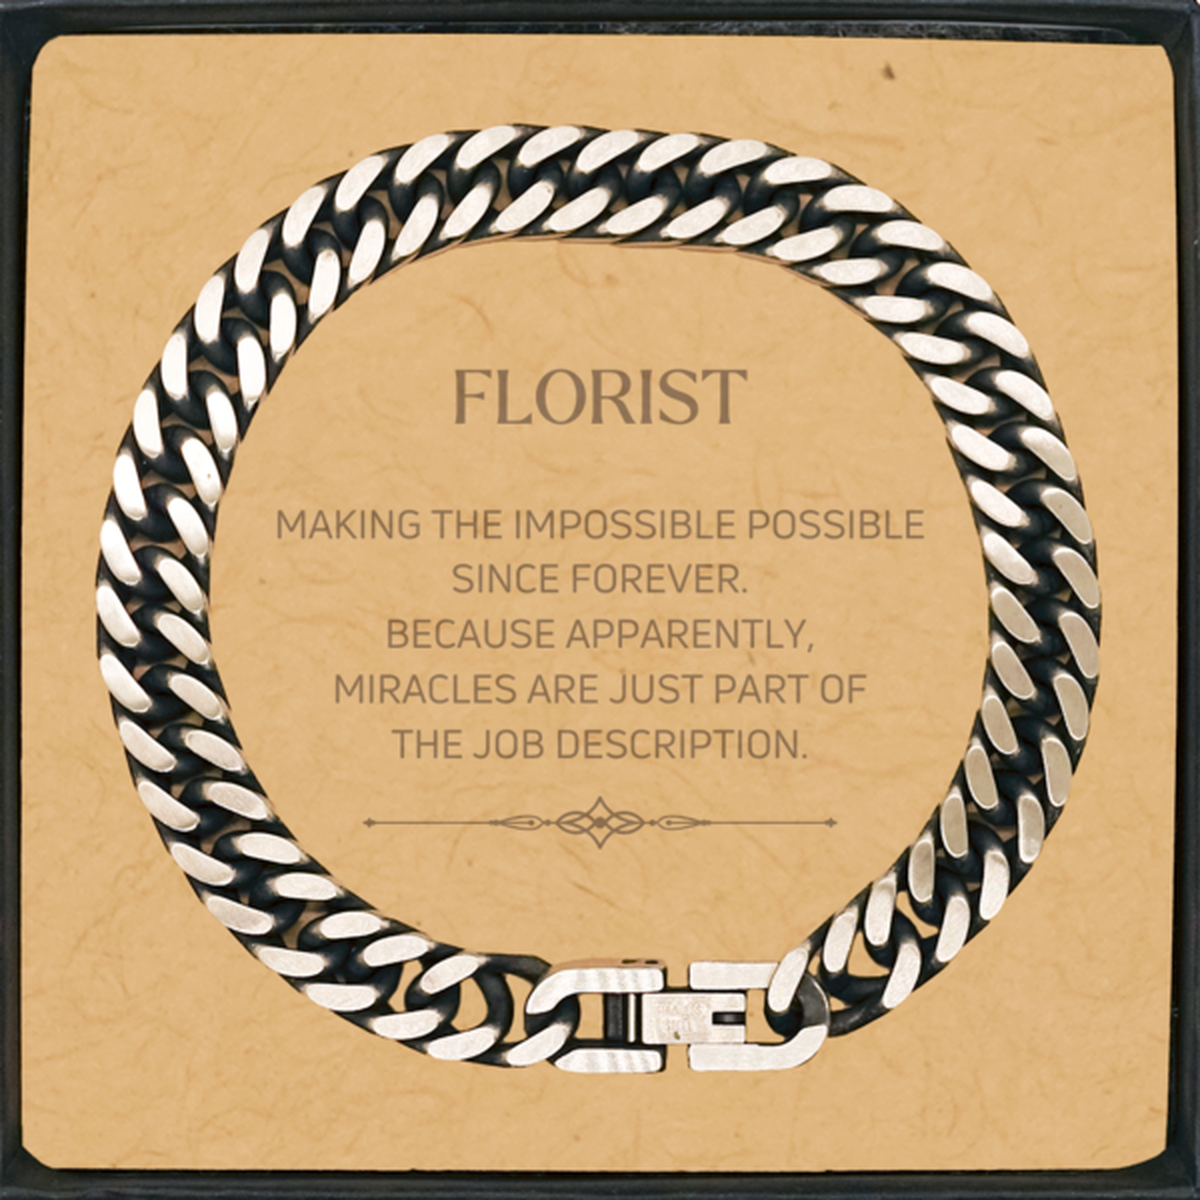 Funny Florist Gifts, Miracles are just part of the job description, Inspirational Birthday Cuban Link Chain Bracelet For Florist, Men, Women, Coworkers, Friends, Boss